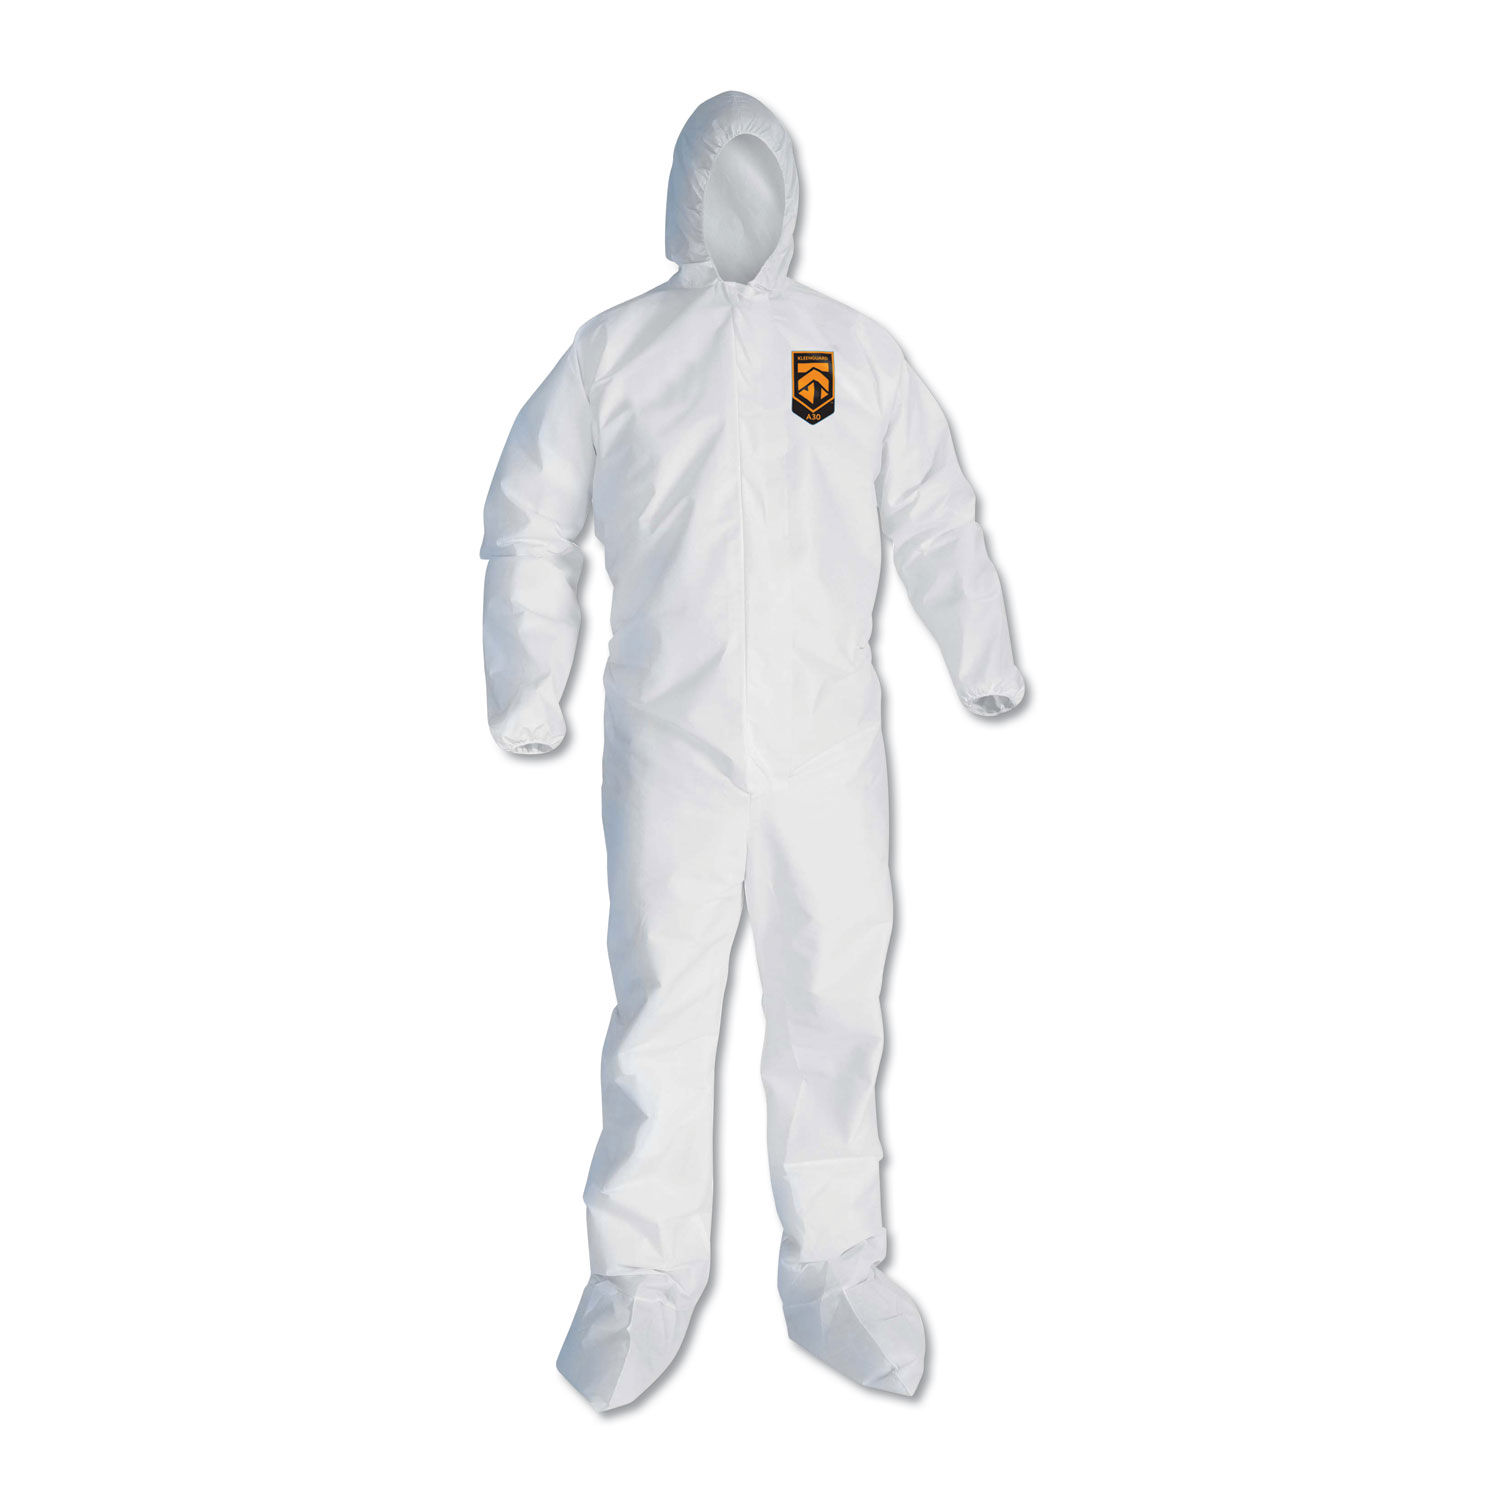 A30 Elastic Back and Cuff Hooded/Boots Coveralls White, 3XL,21/Ct